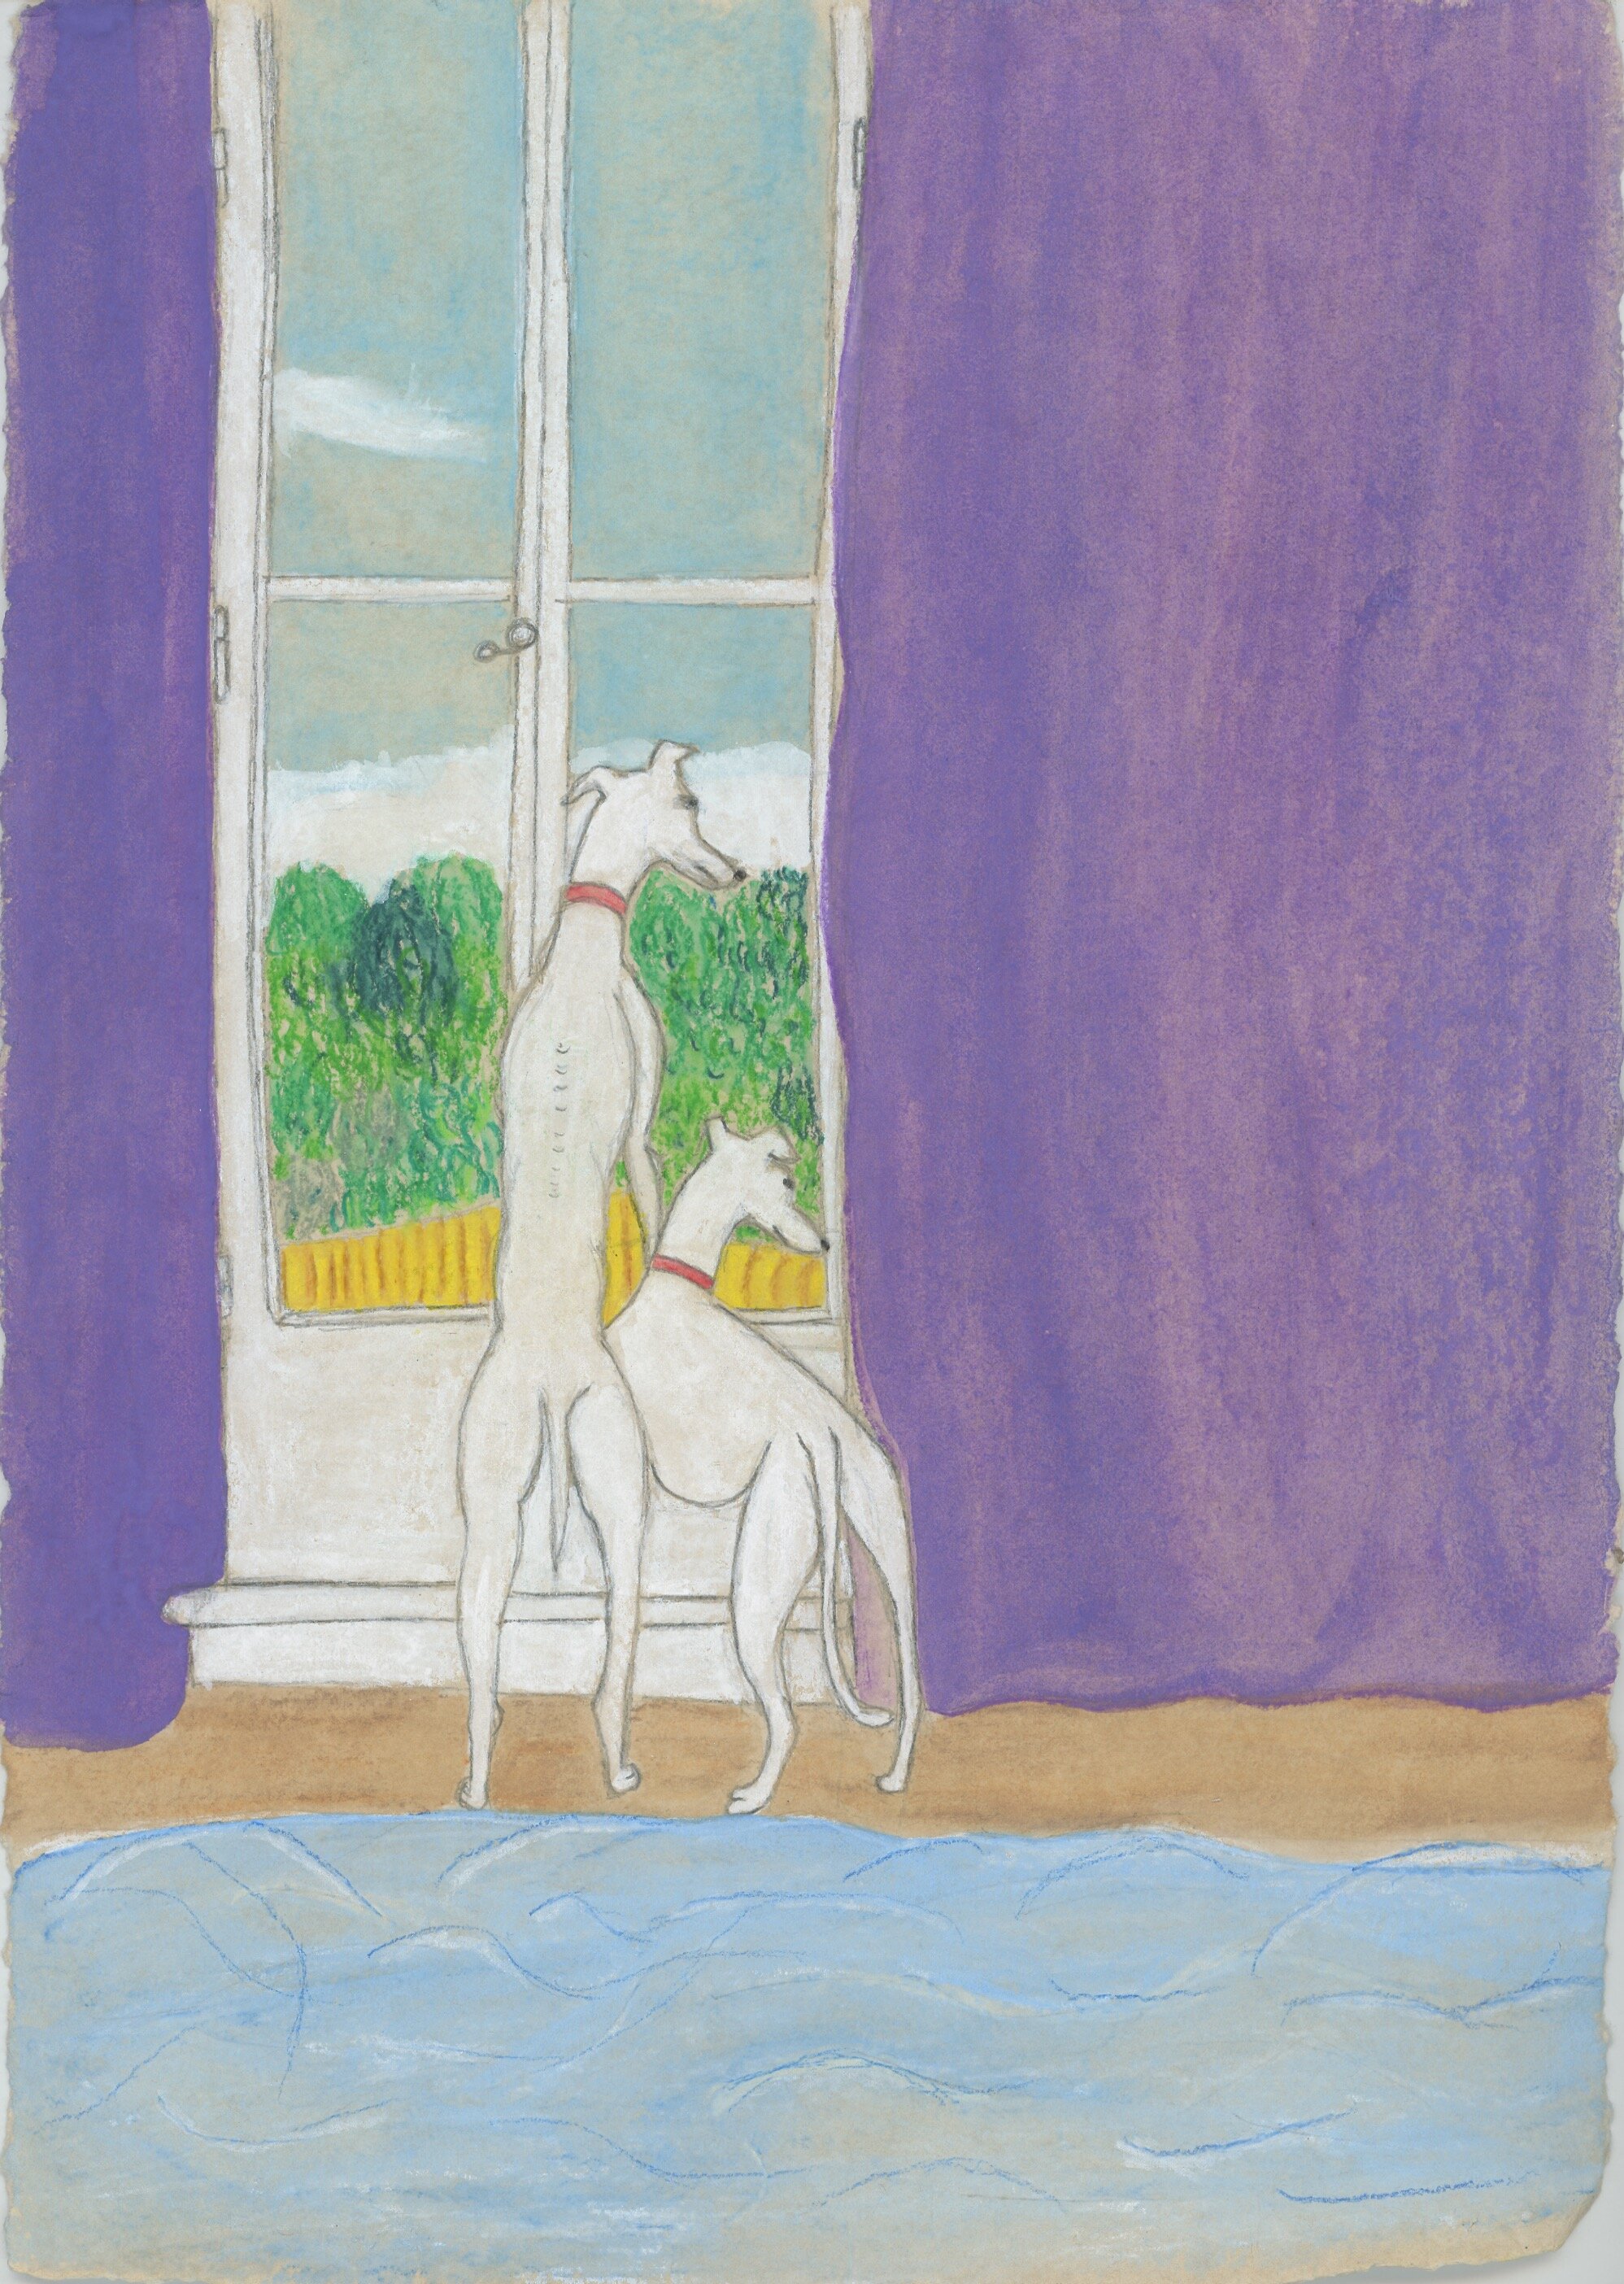 Two dogs looking from a window, 25.5 x 30 cm, 2019